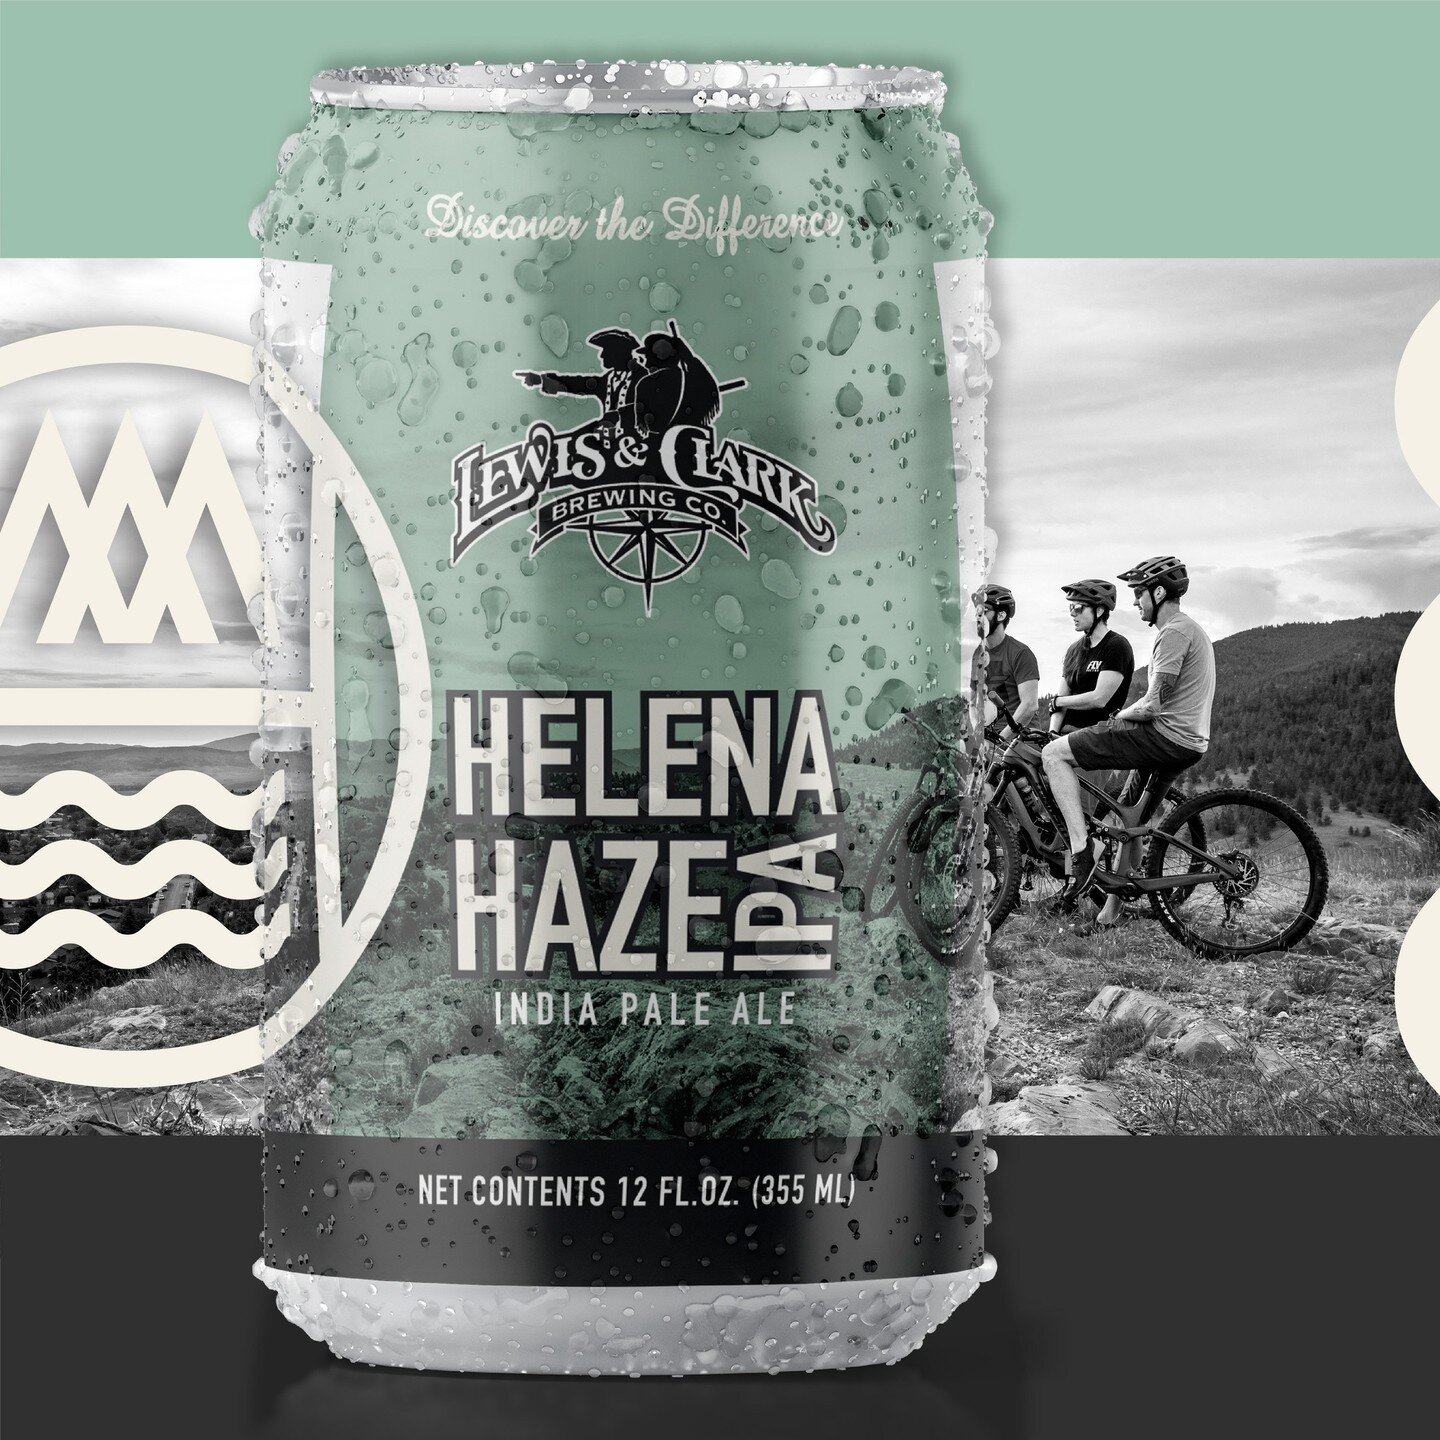 Can Design |  Lewis and Clark Brewing⁠
⁠
Working with @lewisandclarkbrewing and in partnership with @visithelenamontana for the wonderful Helena Haze IPA. Previously known as the Juicy Hazy Obsession, this can was rebranded over the summer to honor o